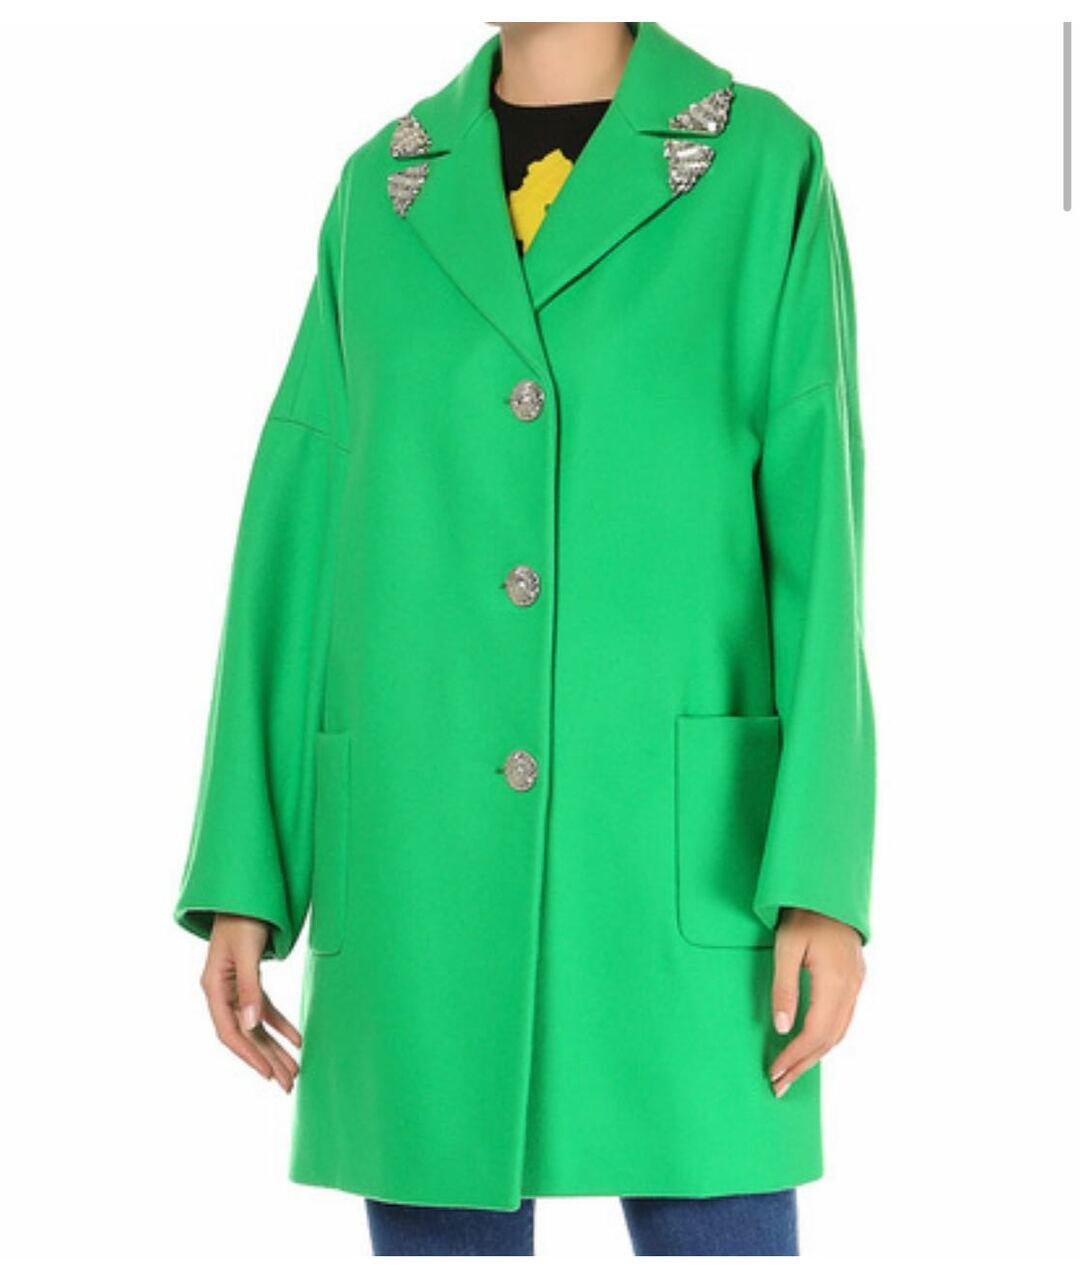 VERSACE  


Green double-breasted coat

Embellished with rhinestones

Signature Medusa gold-tone buttons

Content:
 
90% wool, 10% cashmere

IT Size 38 - US 2



Pre-owned, in excellent condition! 

 100% authentic guarantee 




PLEASE VISIT OUR